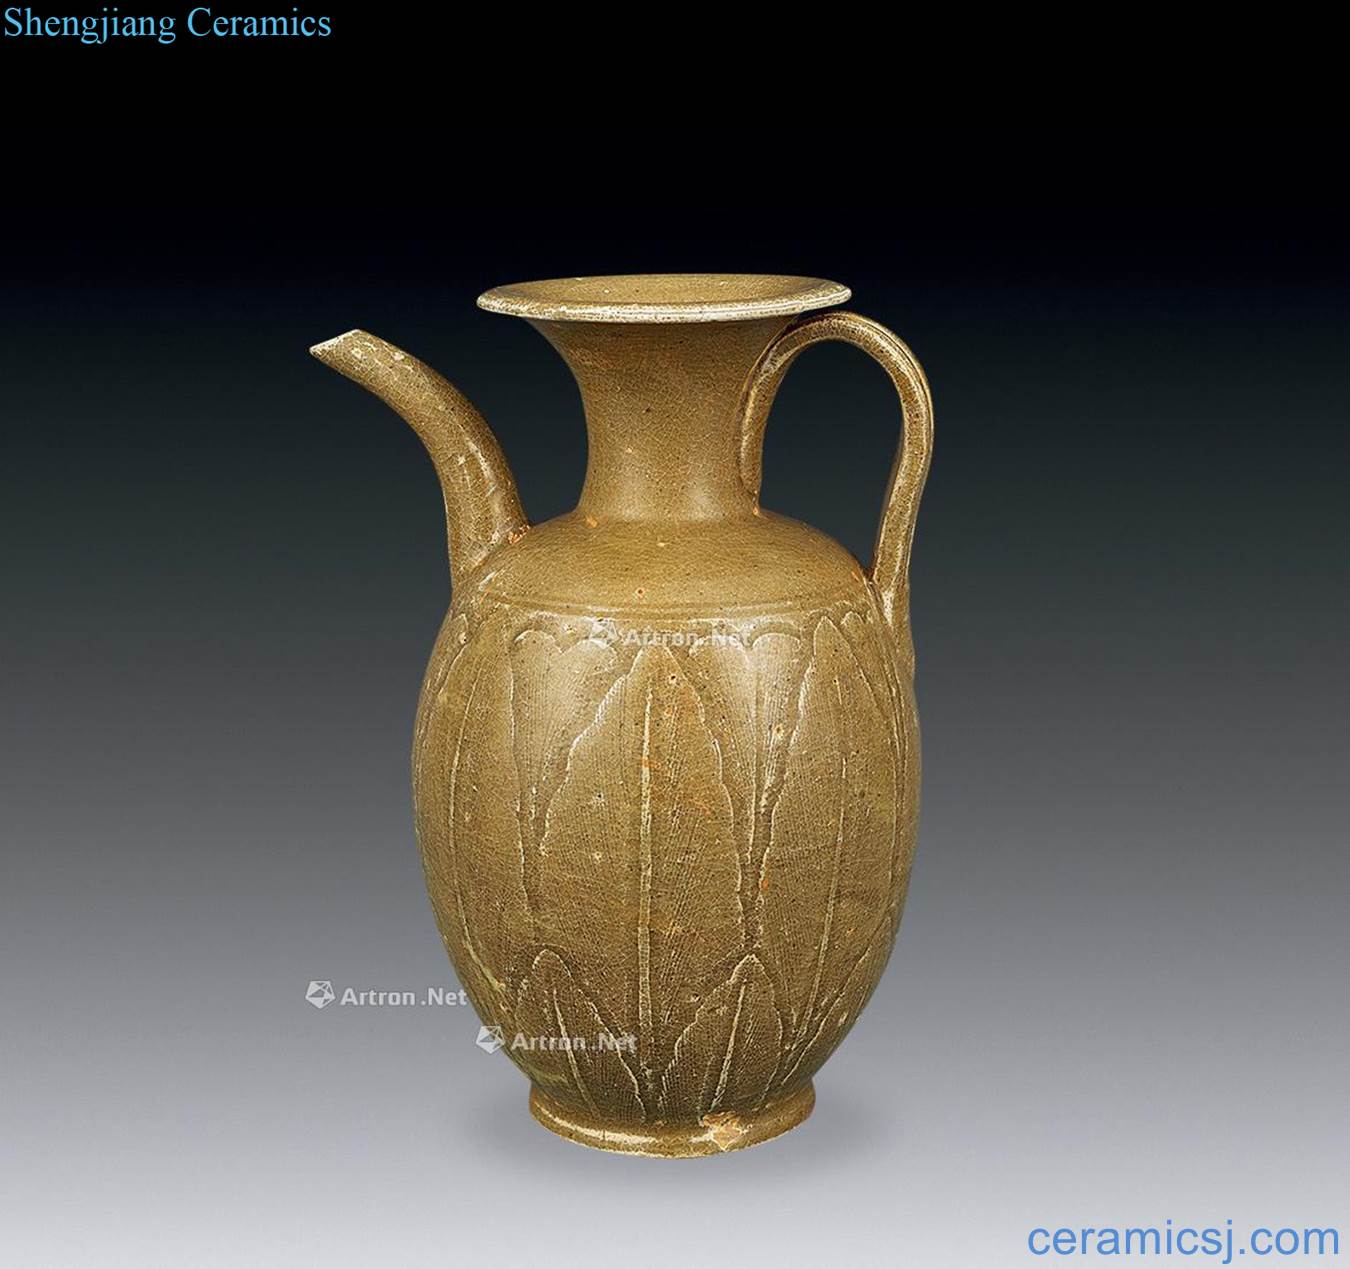 The song dynasty, the kiln ewer